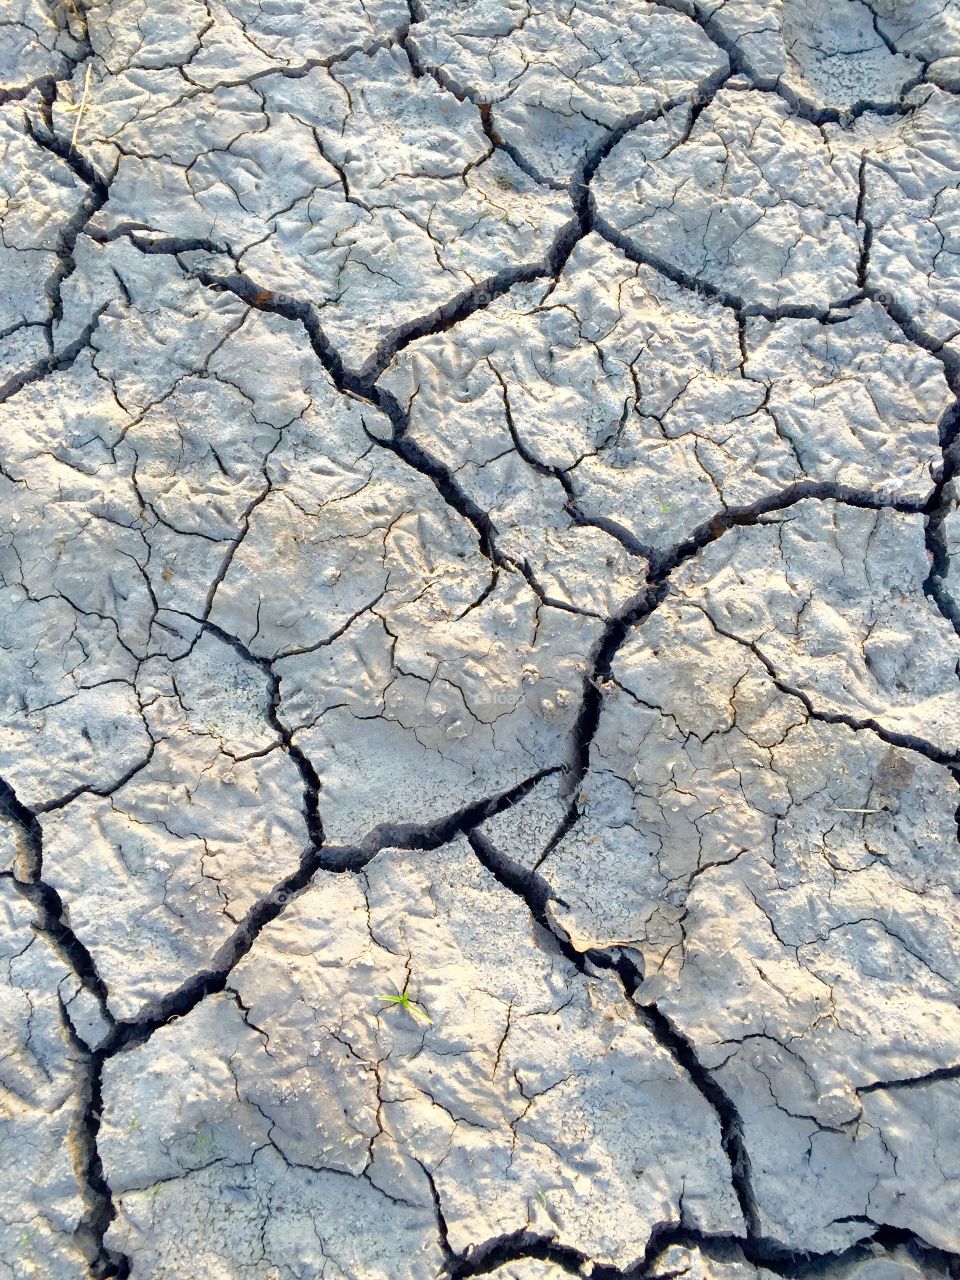 Cracking earth with the drought 